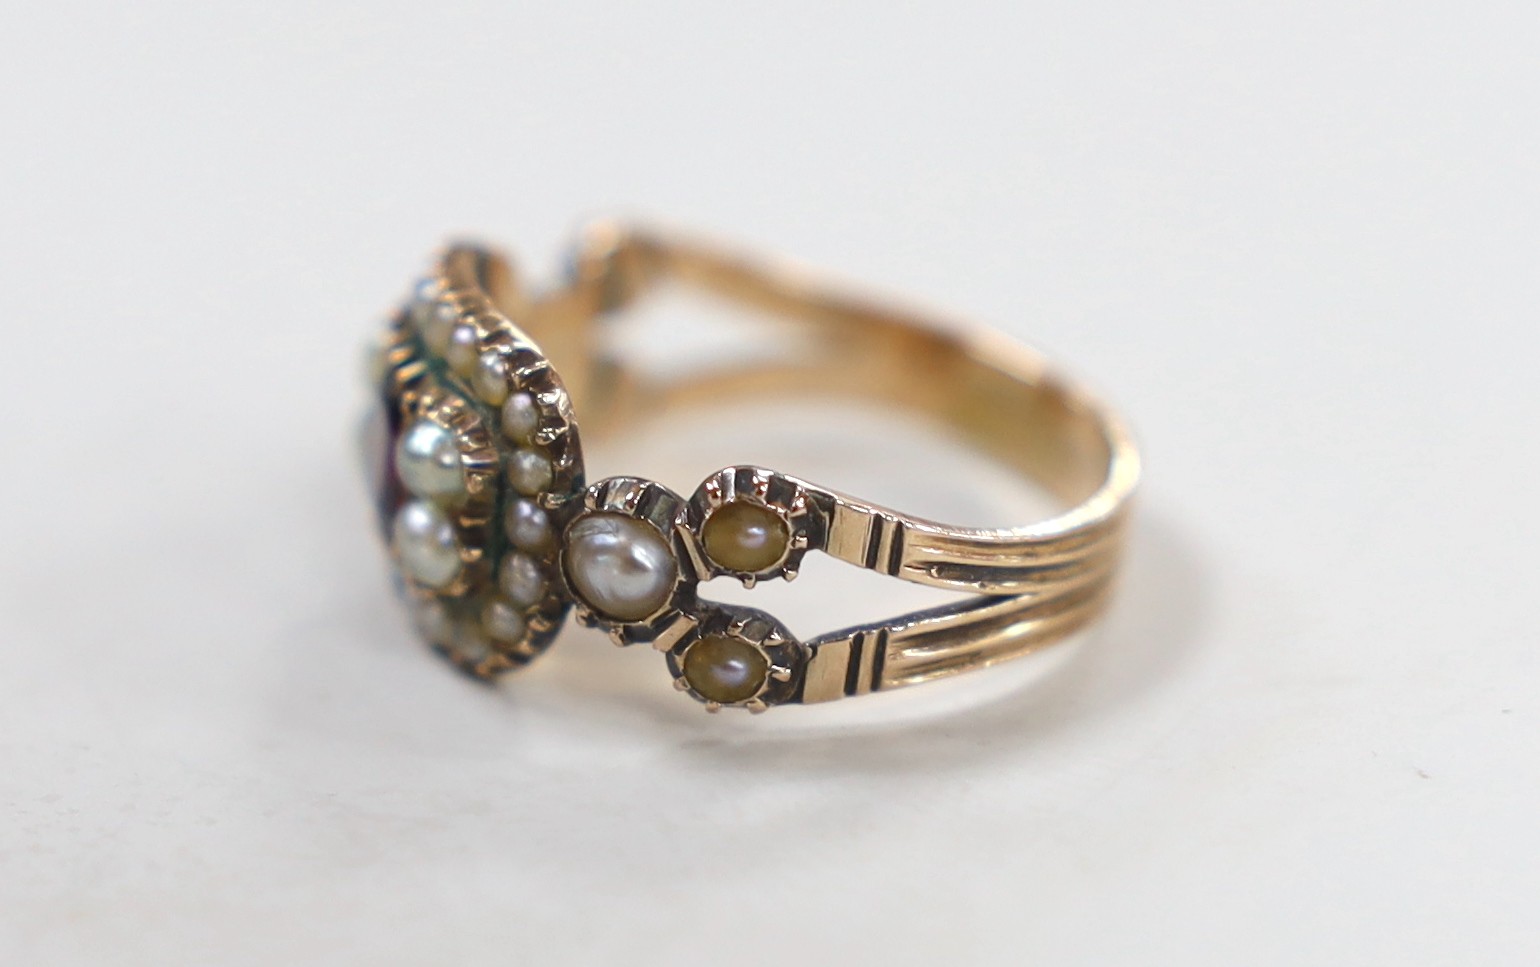 A 19th century yellow metal, foil backed? garnet and split pearl set ring (repair), size O/P, gross 3.6 grams.